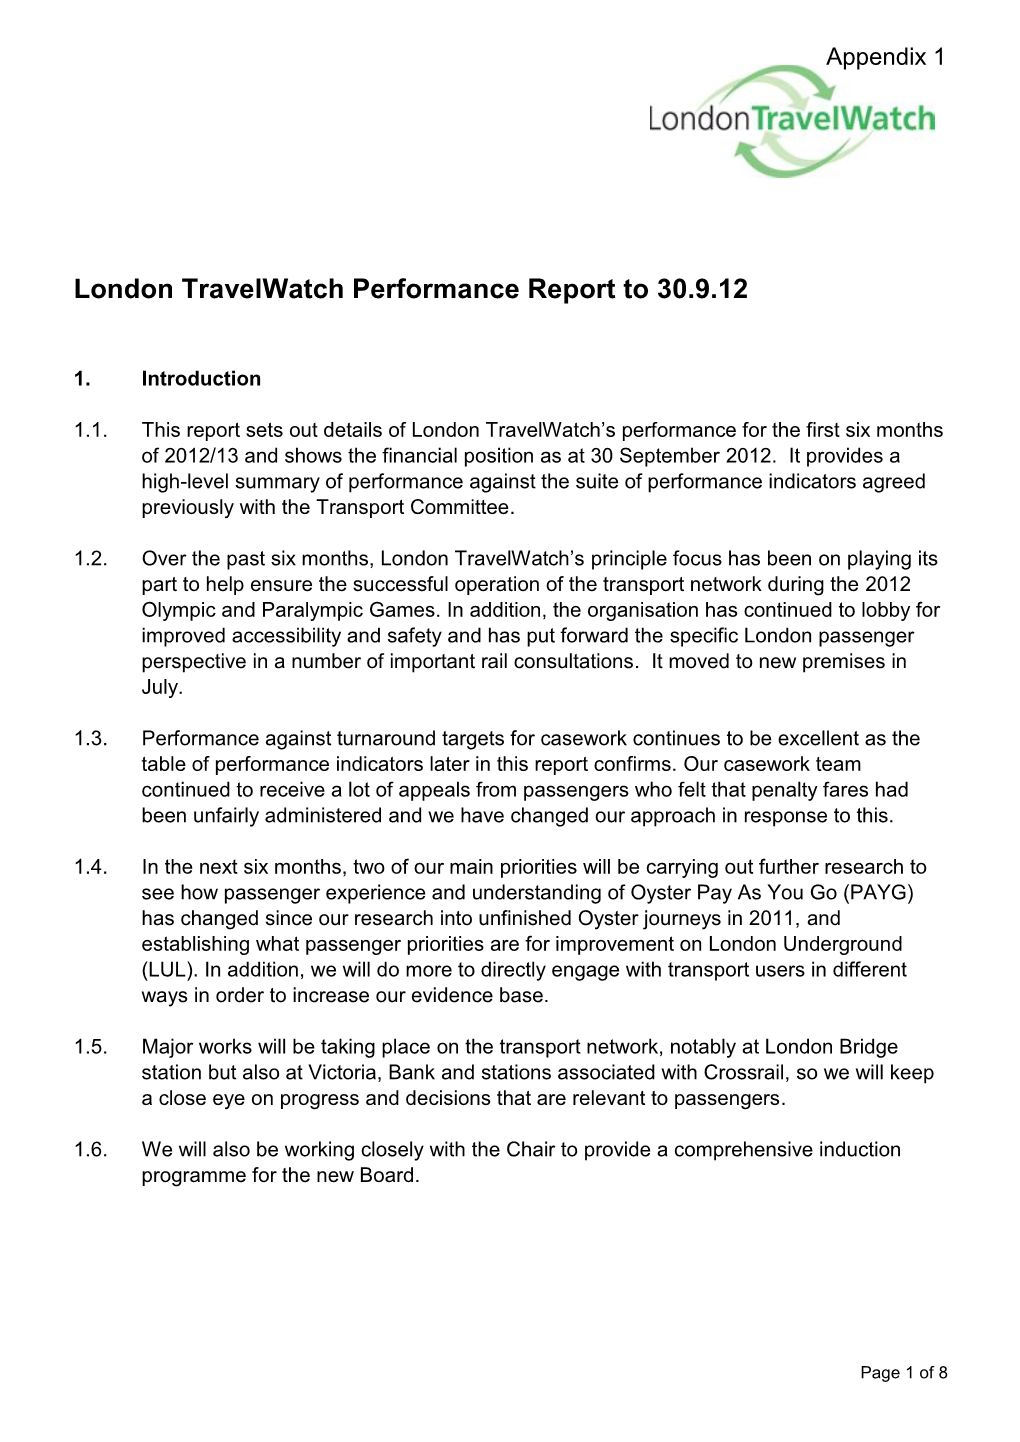 London Travelwatch Performance Monitoring Report